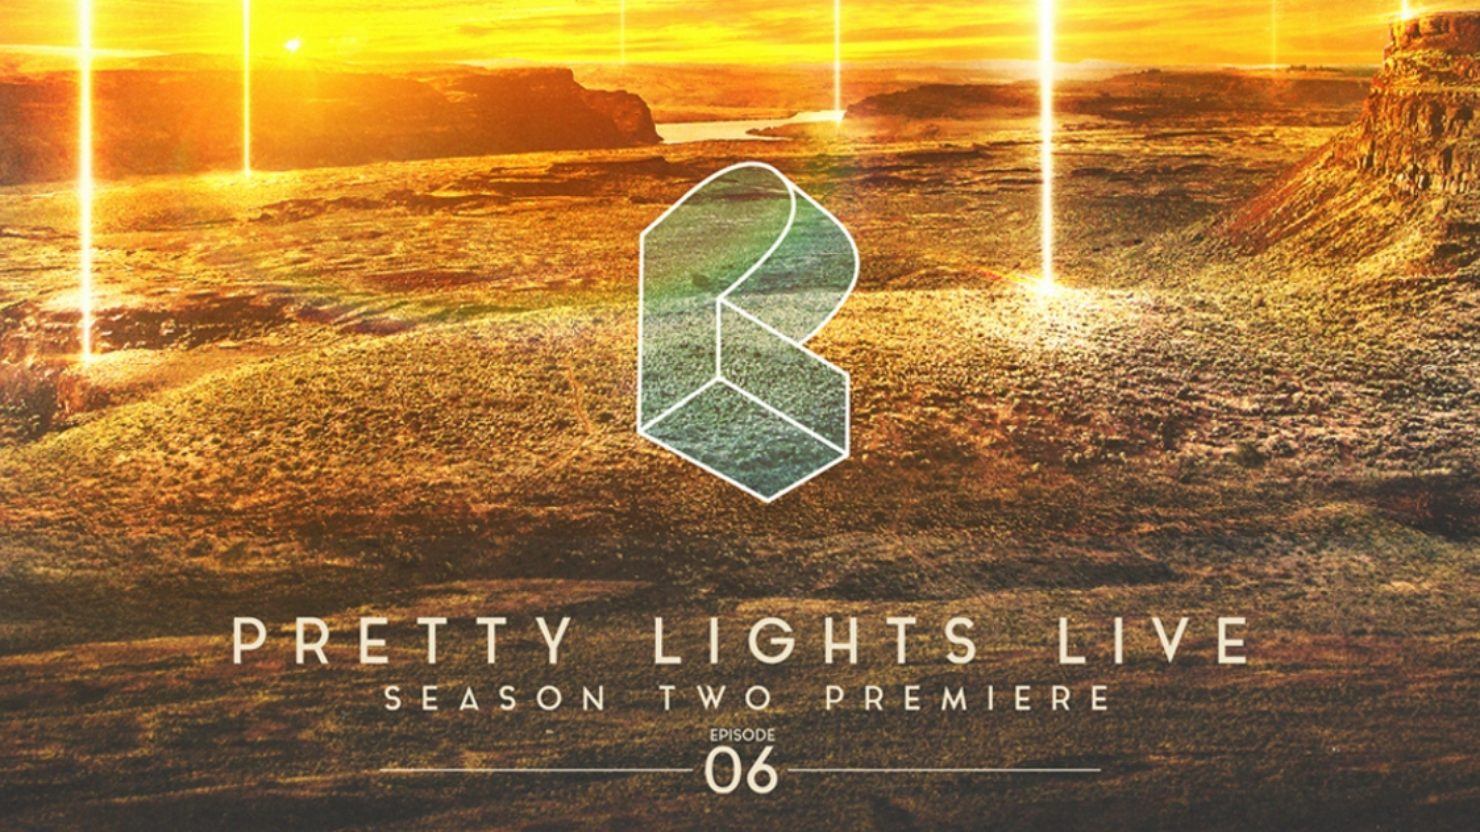 Pretty Lights at the Gorge